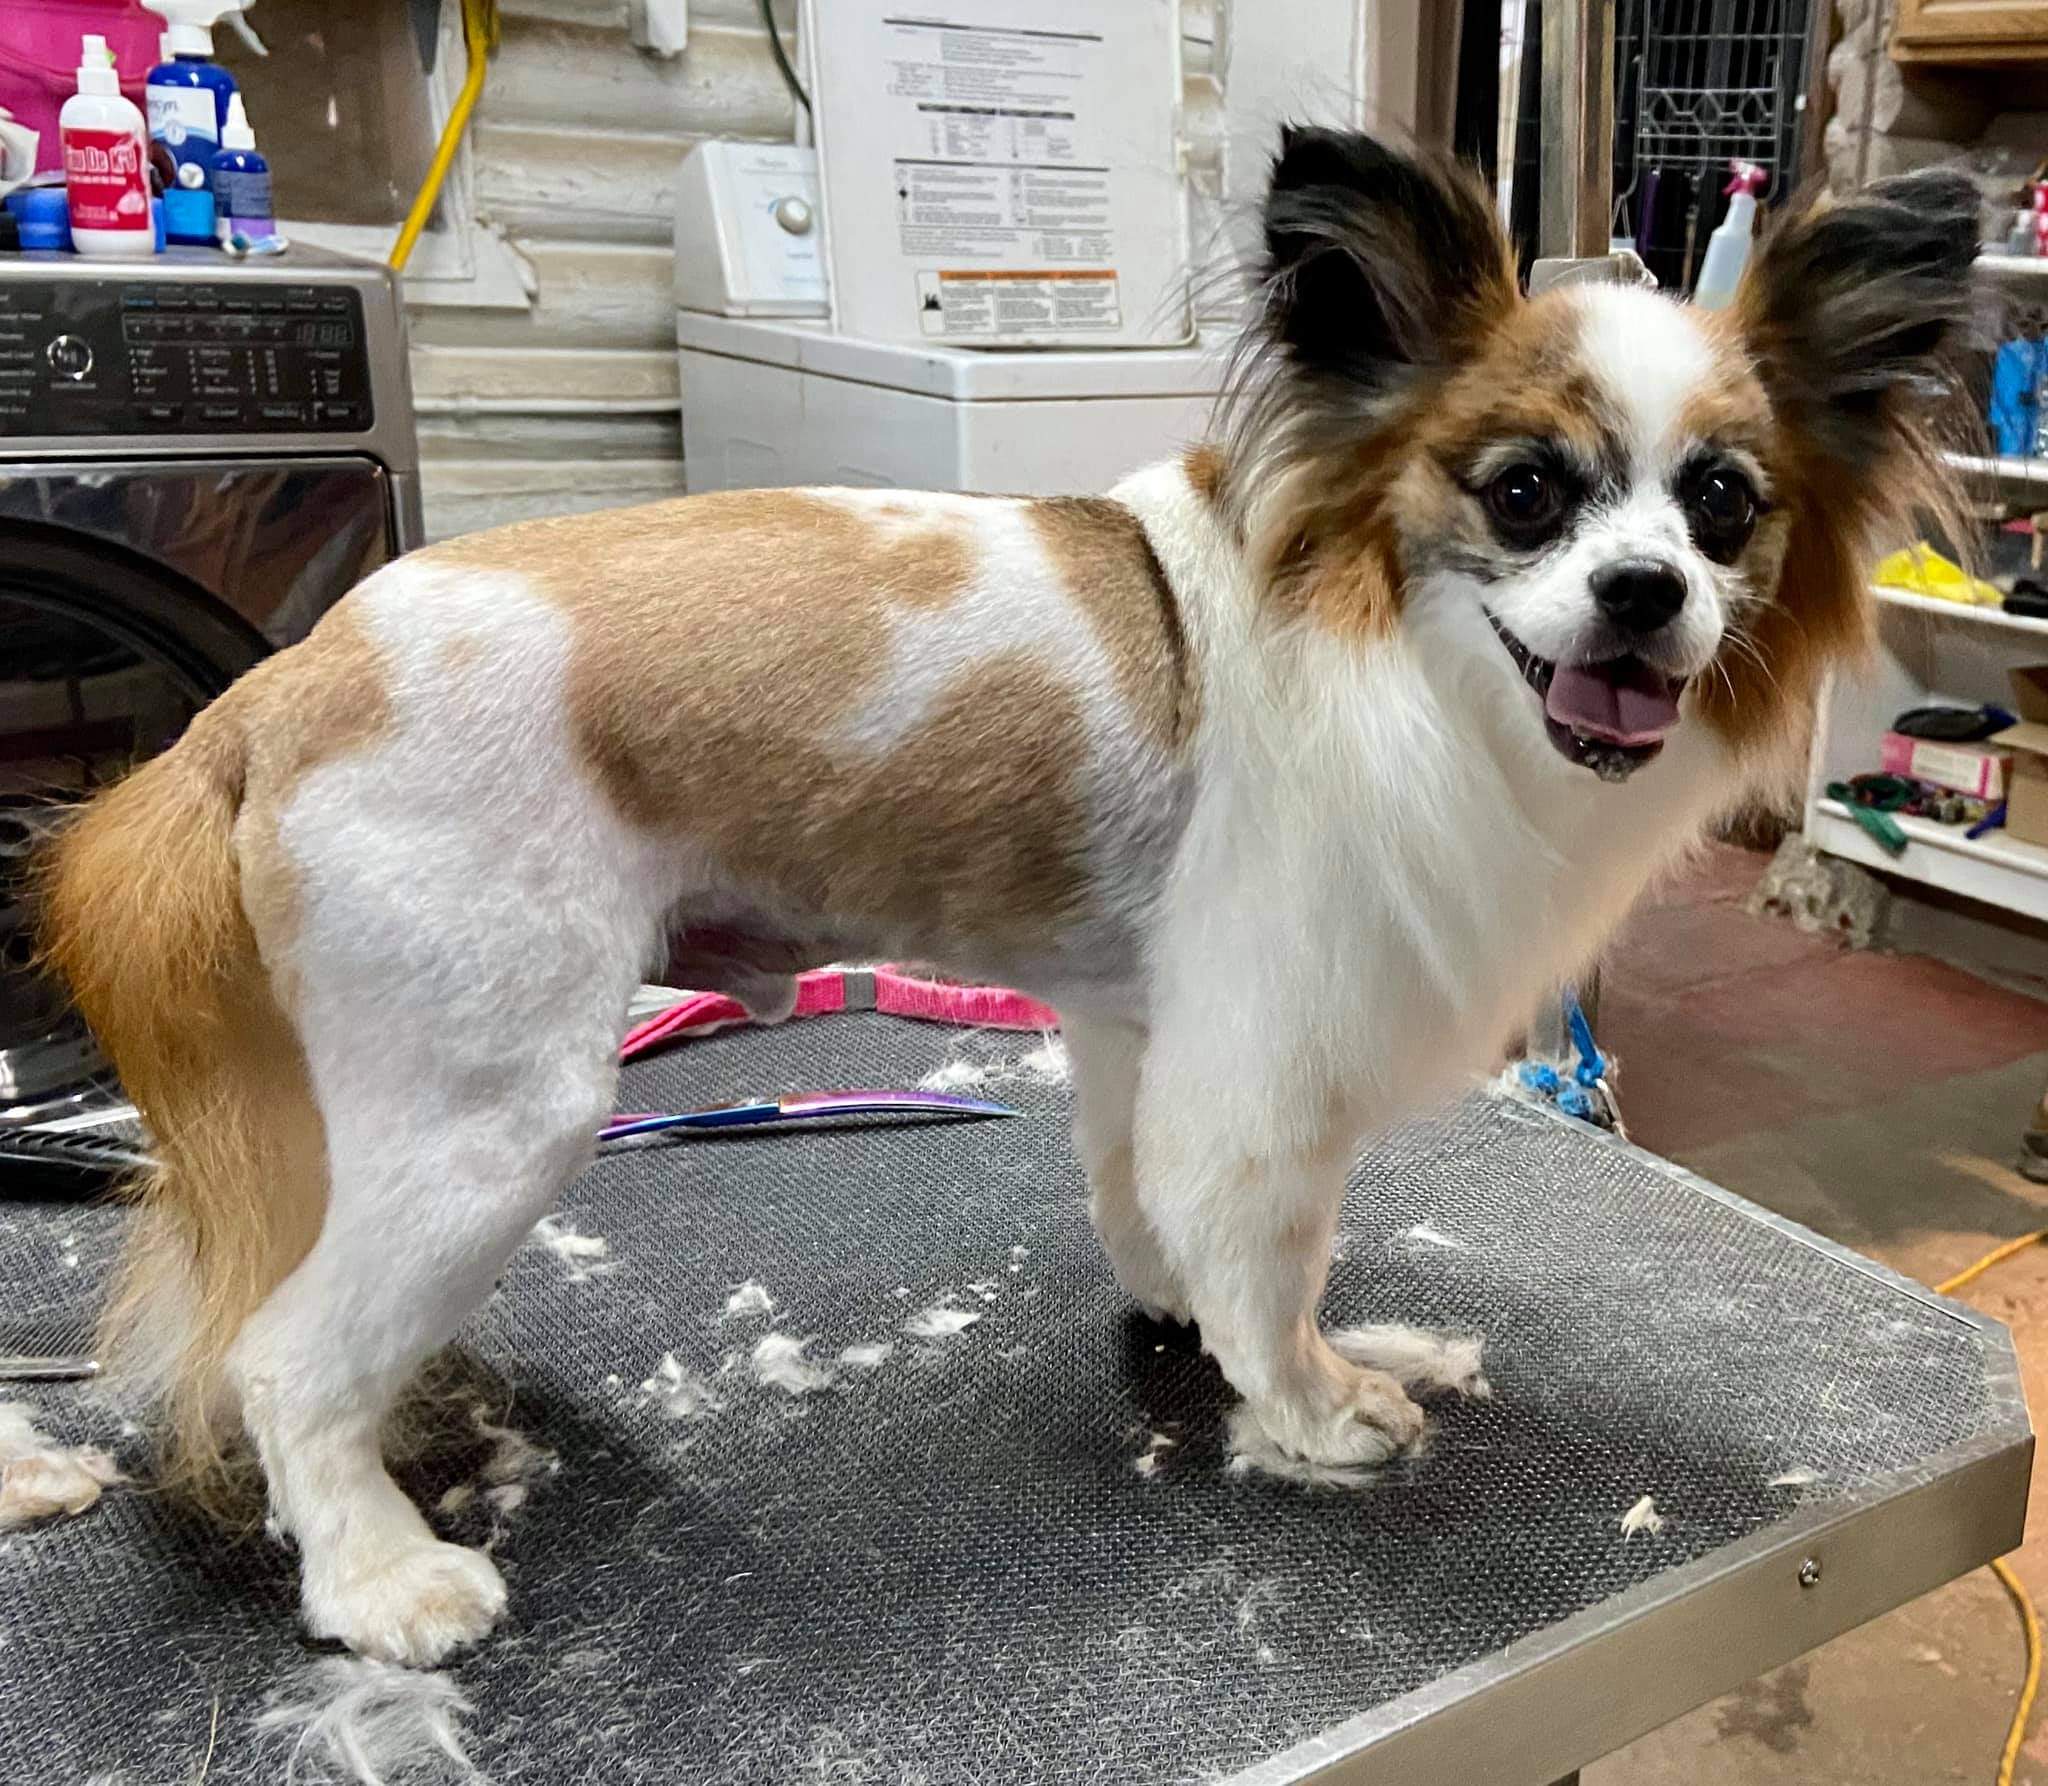 Papillon groomed by student at mastergroomersacademy.com